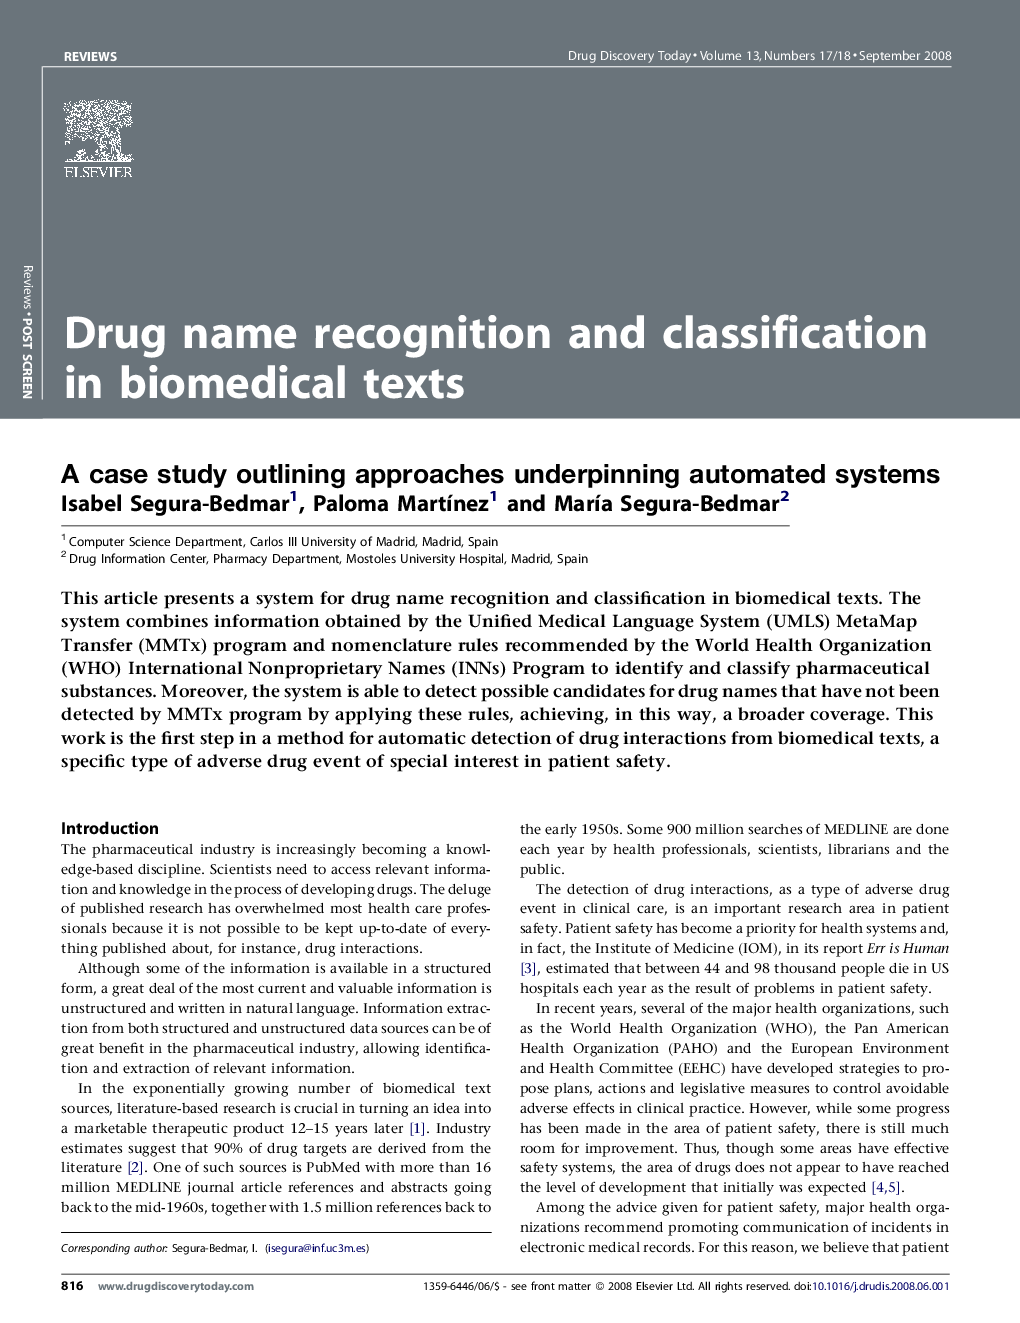 Drug name recognition and classification in biomedical texts: A case study outlining approaches underpinning automated systems